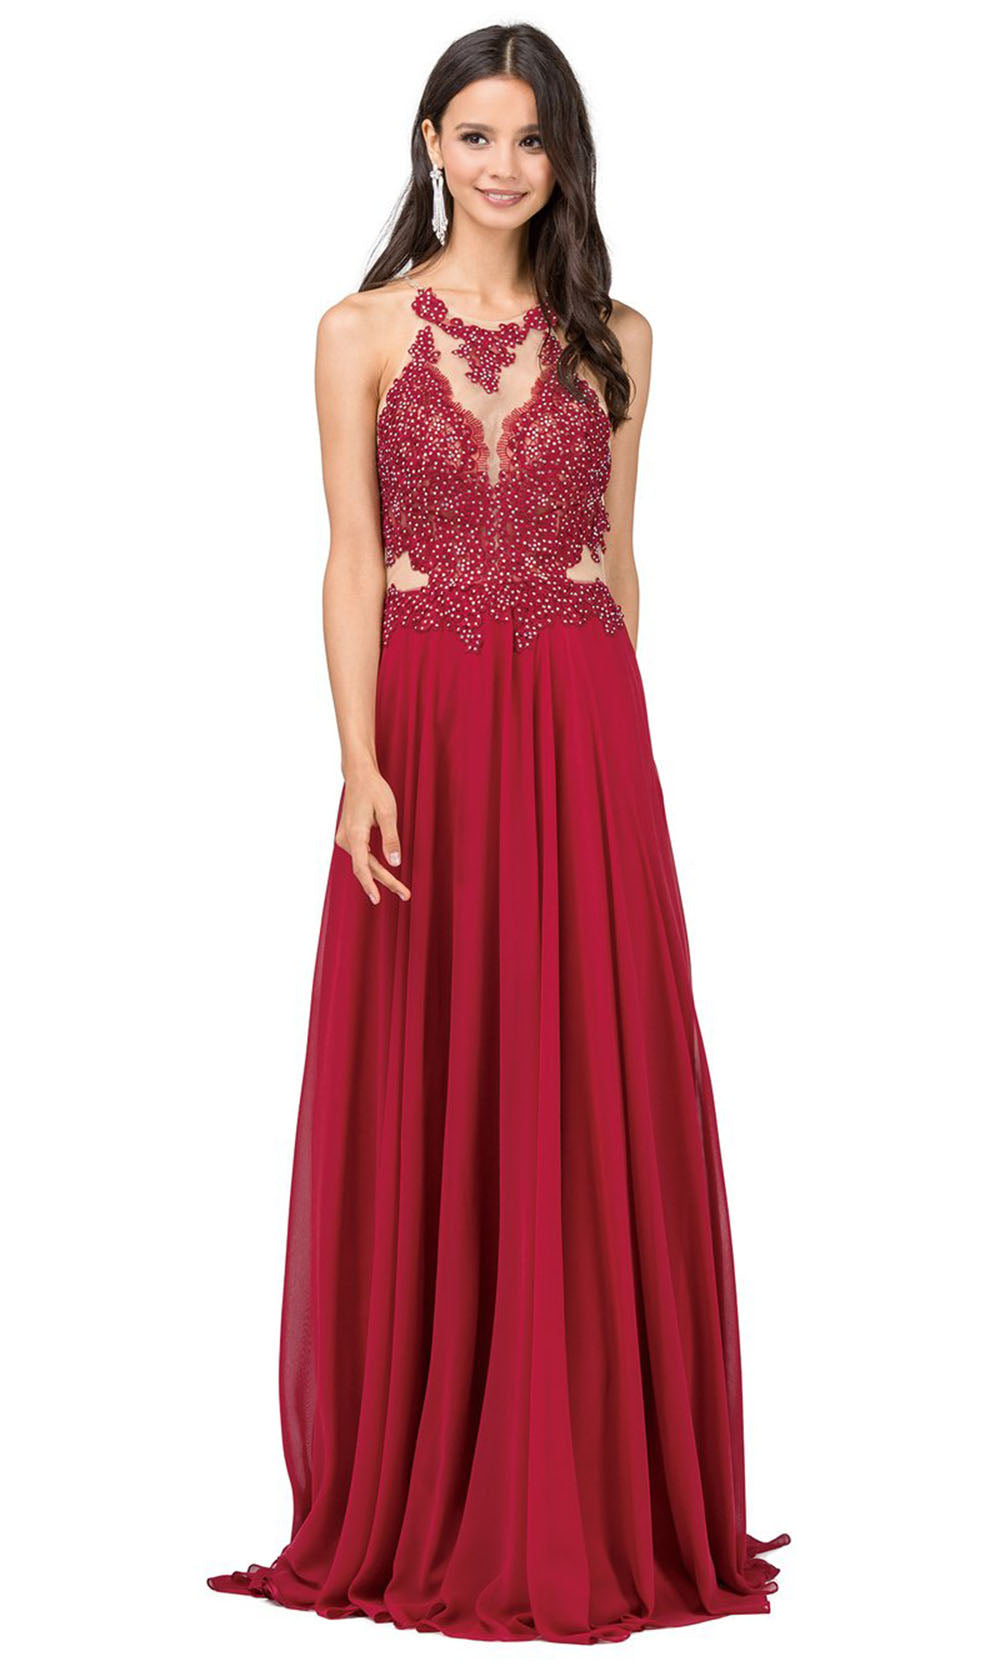 Dancing Queen - 2015 Embroidered Halter Neck A-Line Dress In Red